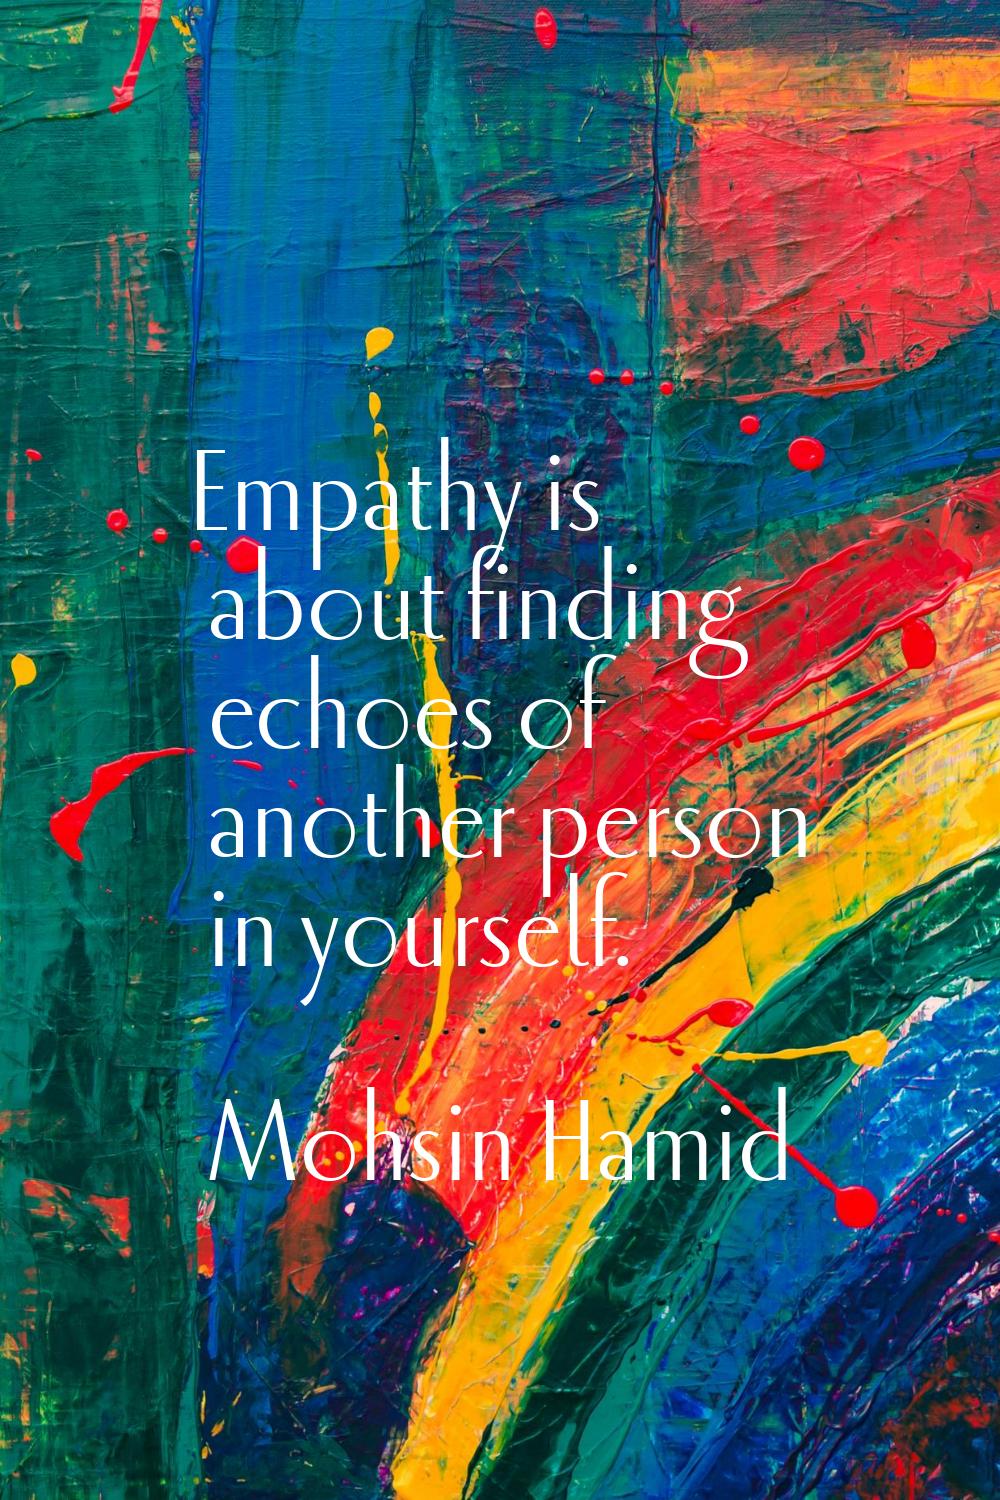 Empathy is about finding echoes of another person in yourself.